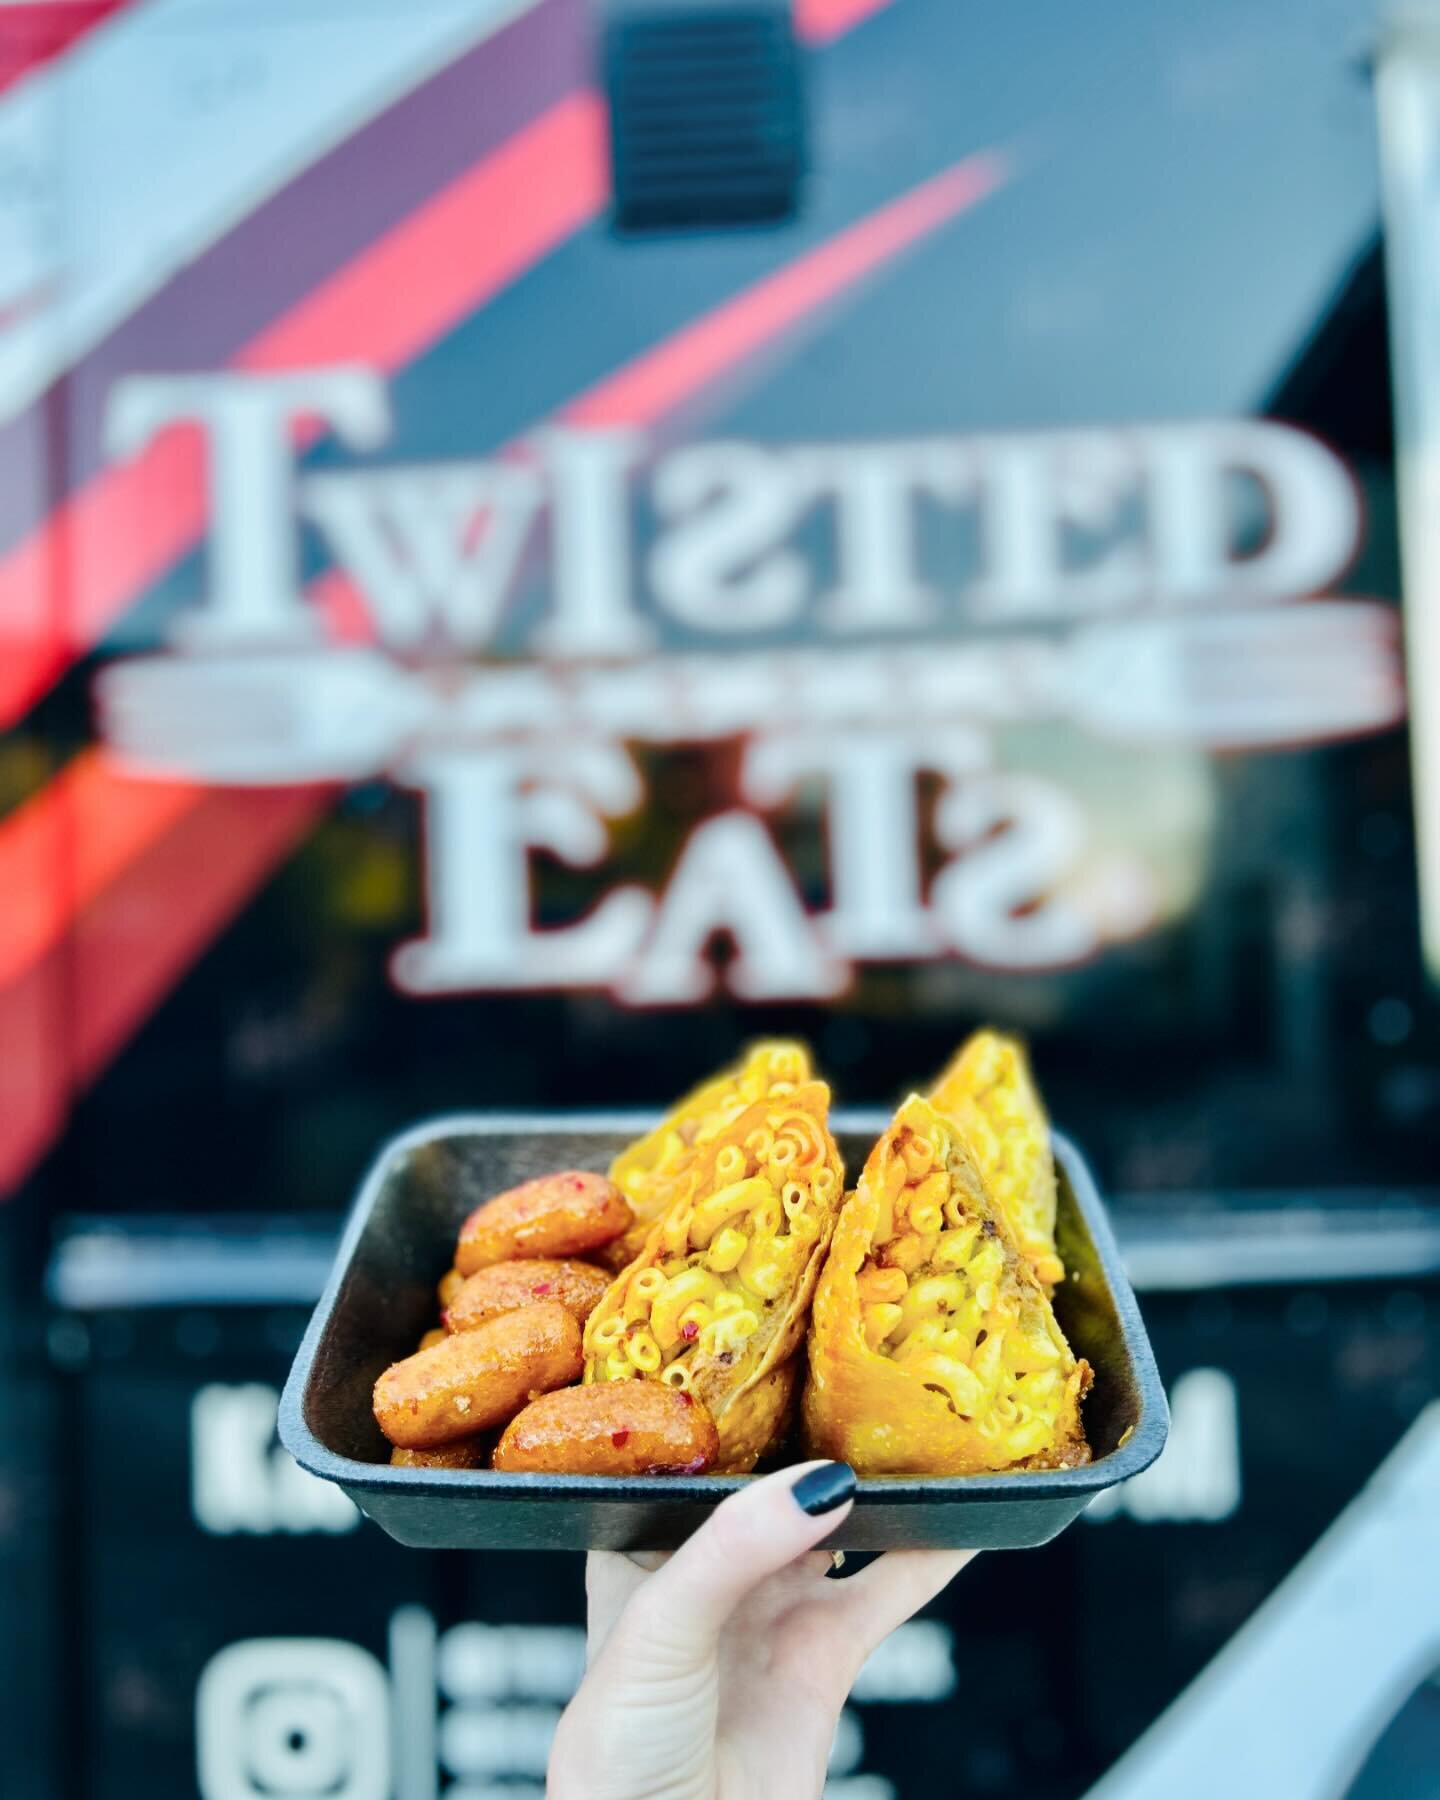 Time to turn up on a Tuesday 🥳 

Join us tonight 4-9pm

#twistedeats #twistedeatstruck #slowplaybrewing #rockhillsc